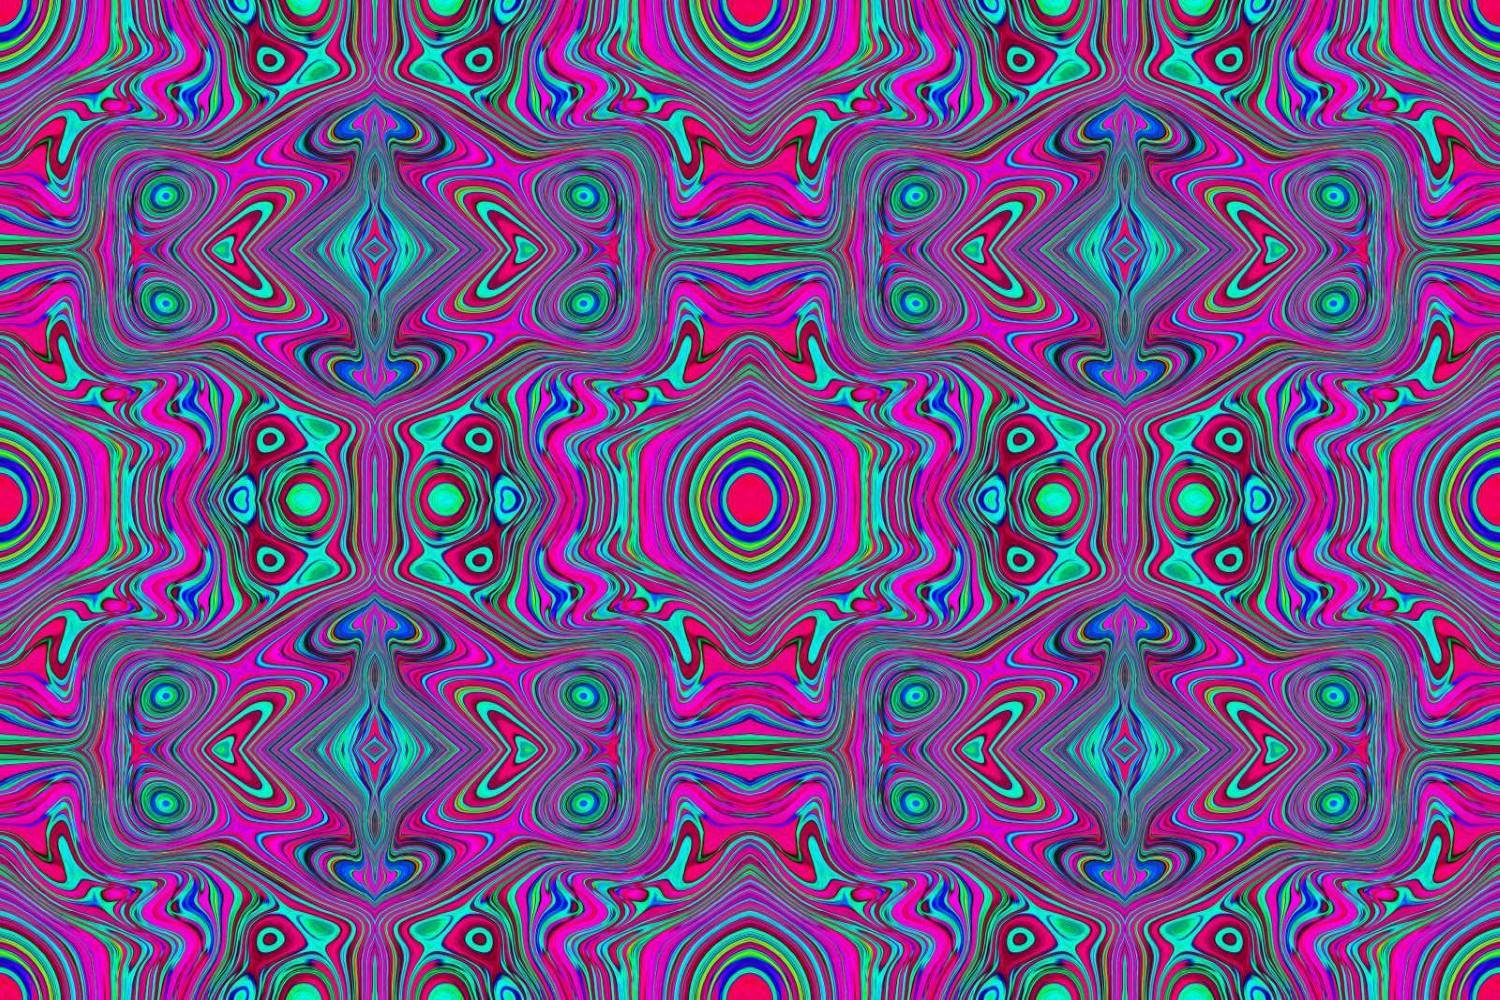 Trippy Retro Magenta, Blue and Green Abstract